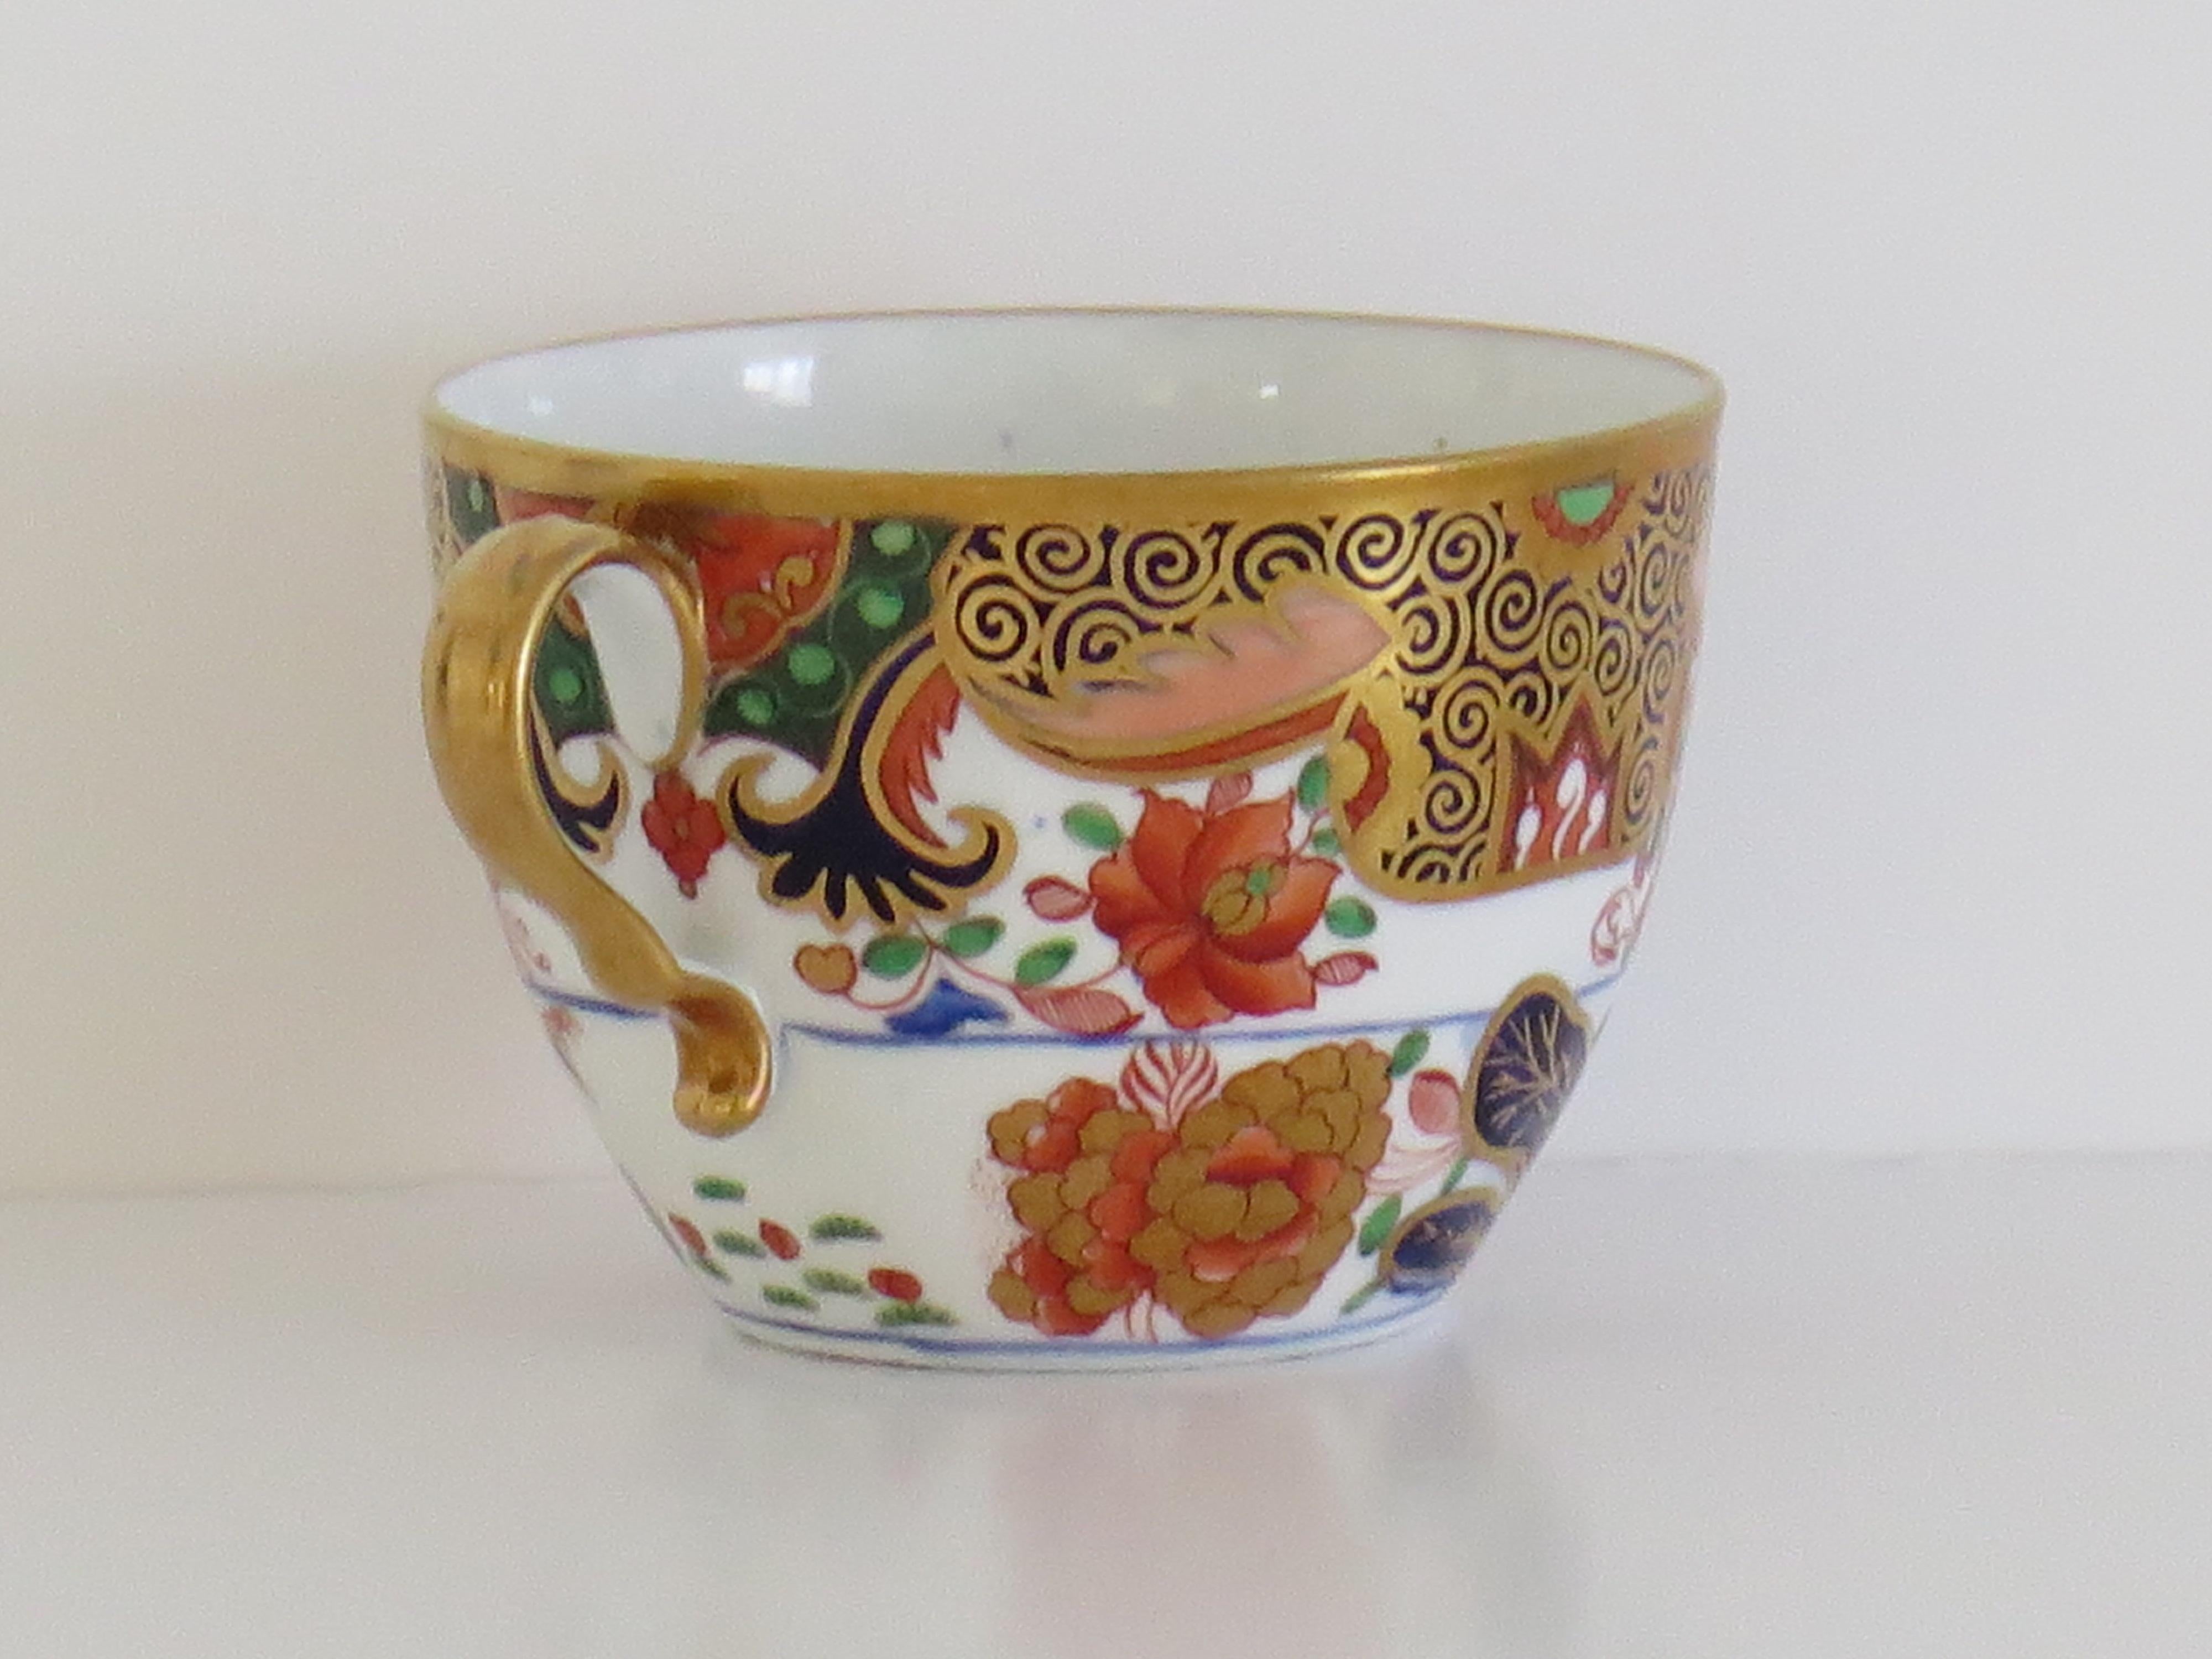 English Spode Porcelain Tea Cup in Hand Painted & Gilded Pattern 967, circa 1810 For Sale